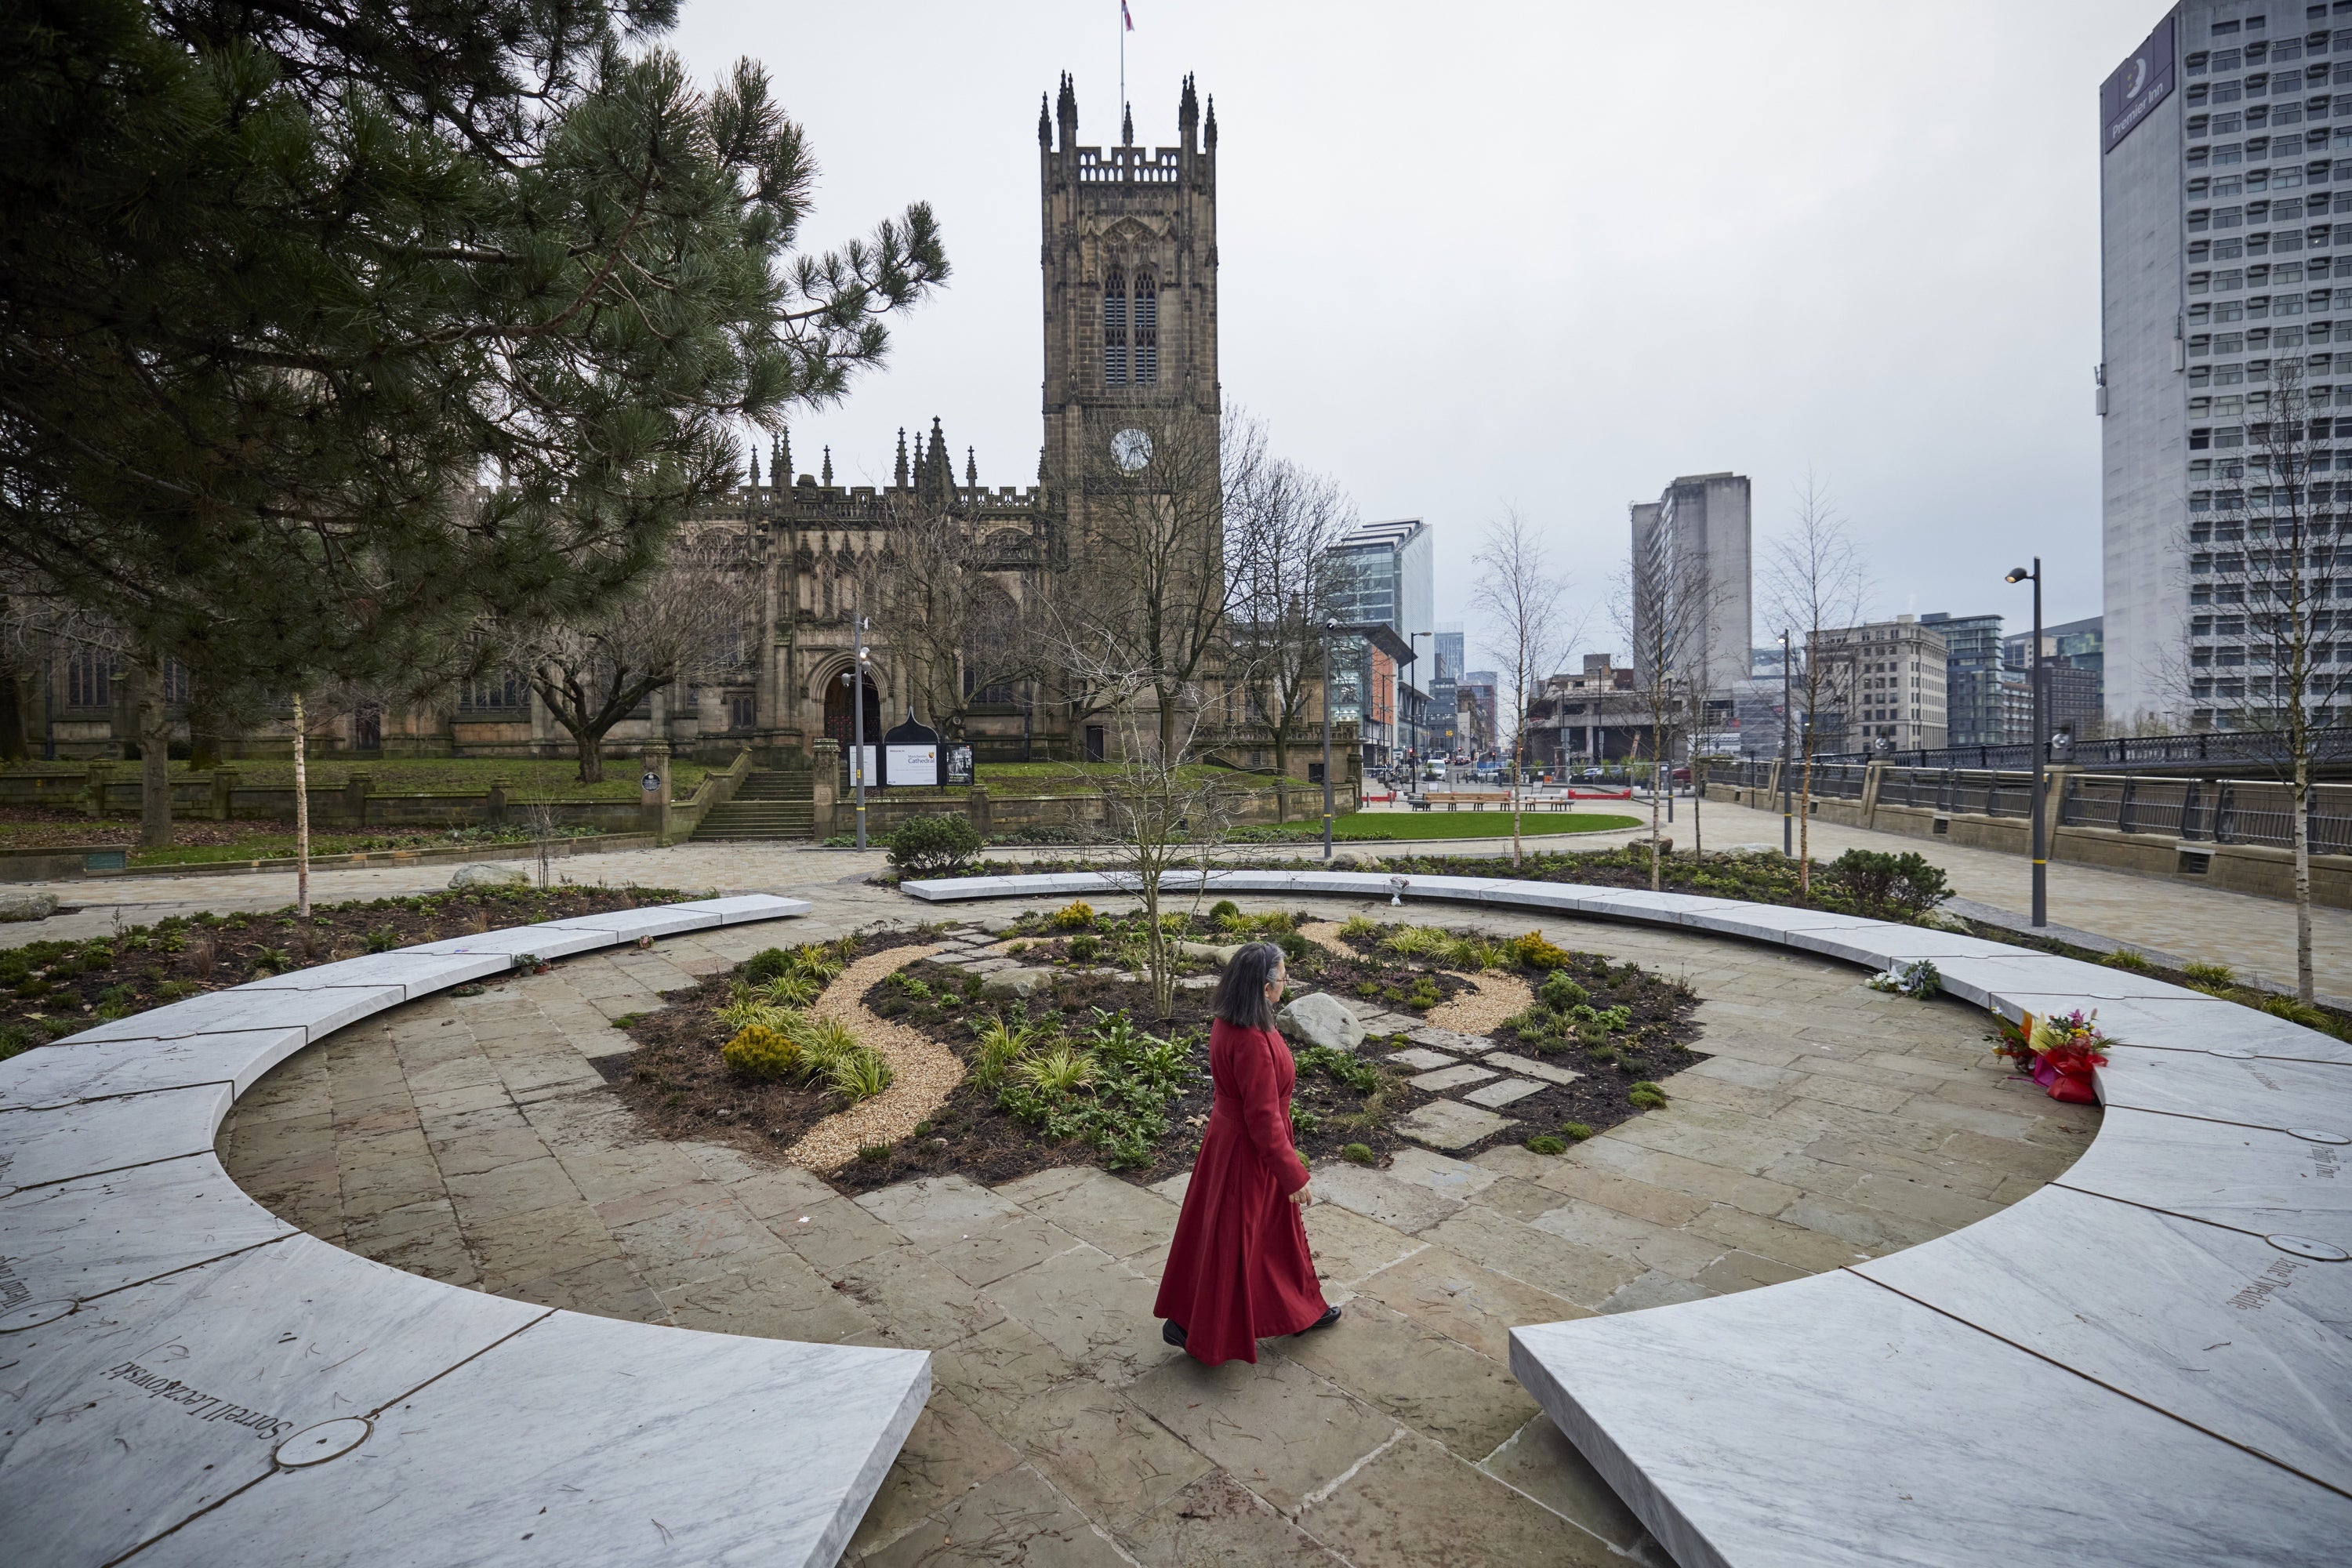 A man has been charged with vandalising the Glade of LIght memorial, a tribute to the 22 people murdered in the Manchester Arena terror attack (Mark Waugh/Manchester City Council/PA)